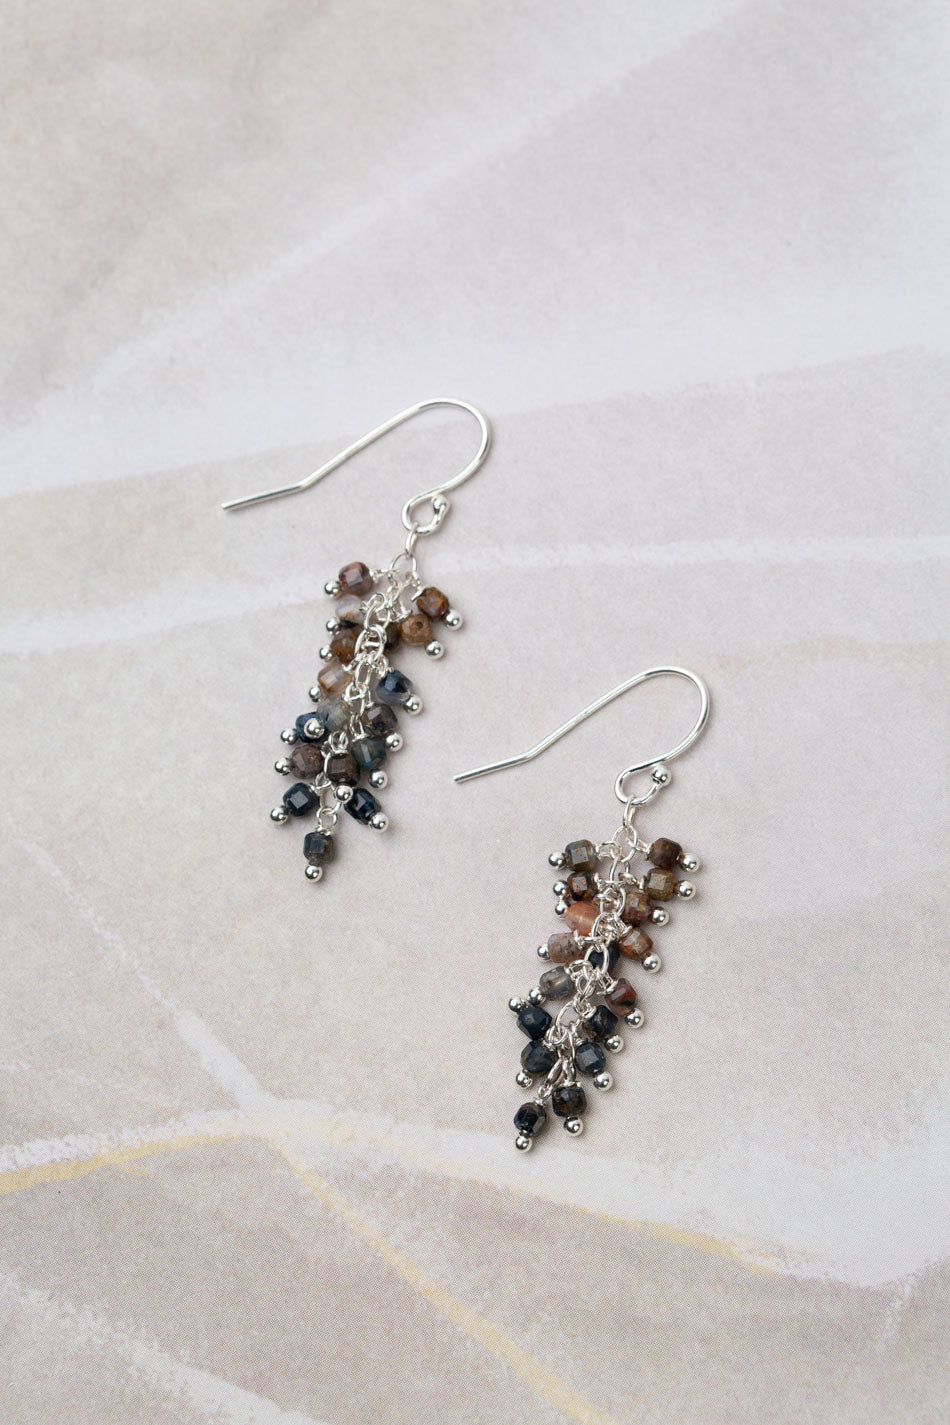 Limited Edition Faceted Pietersite Cluster Earrings